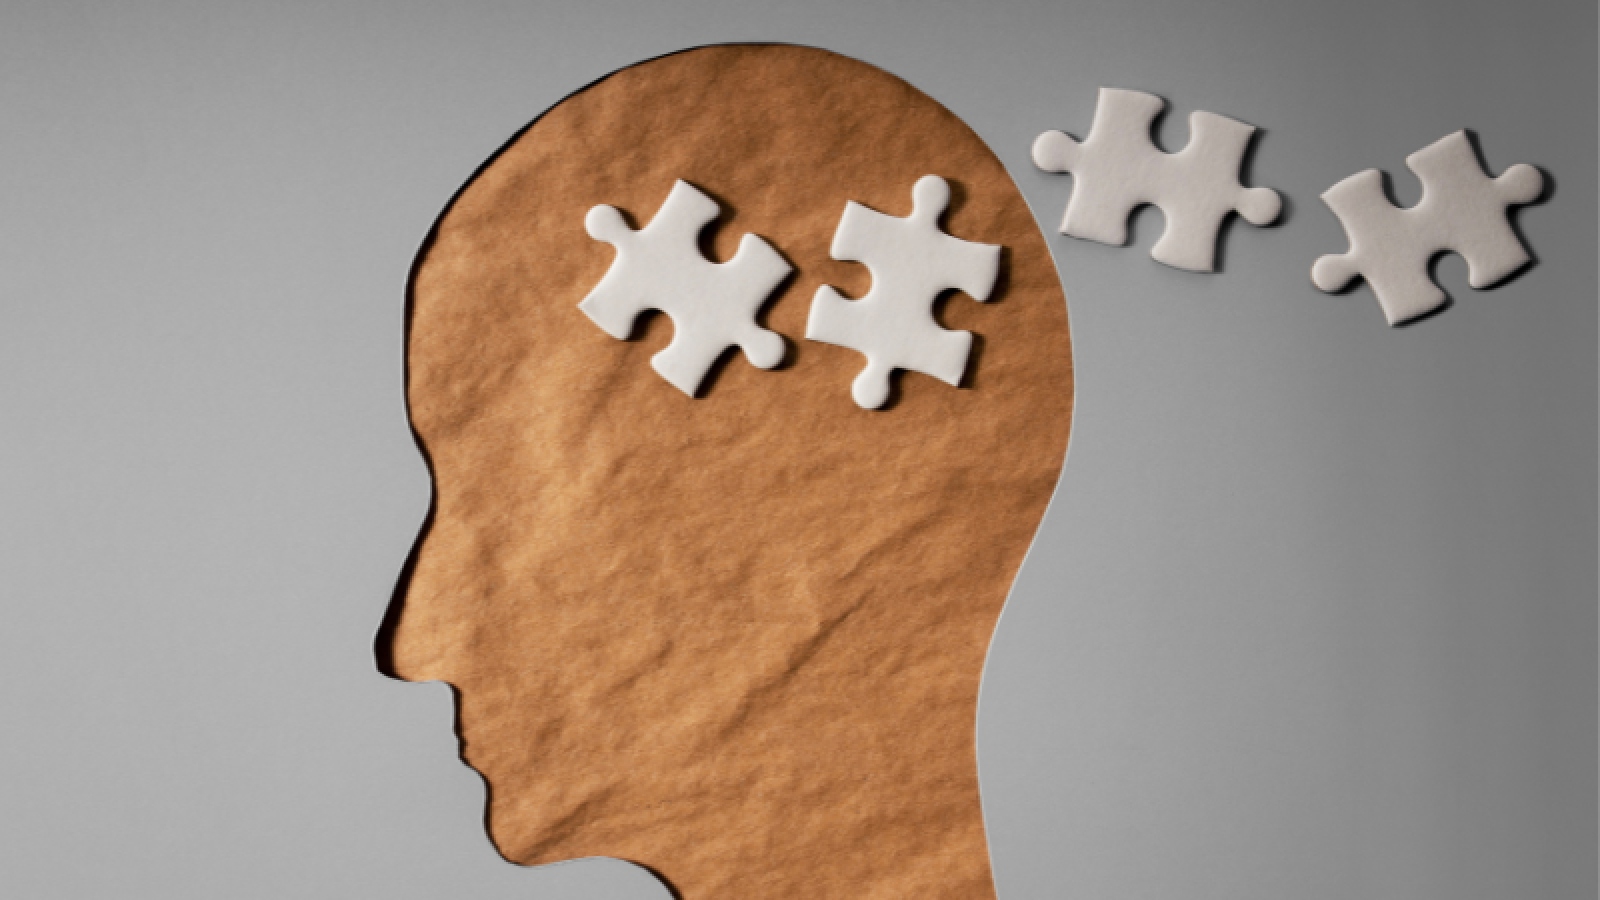 A side profile on a person is cut out of paper with some jigsaw pieces on the brain area and some next to it.